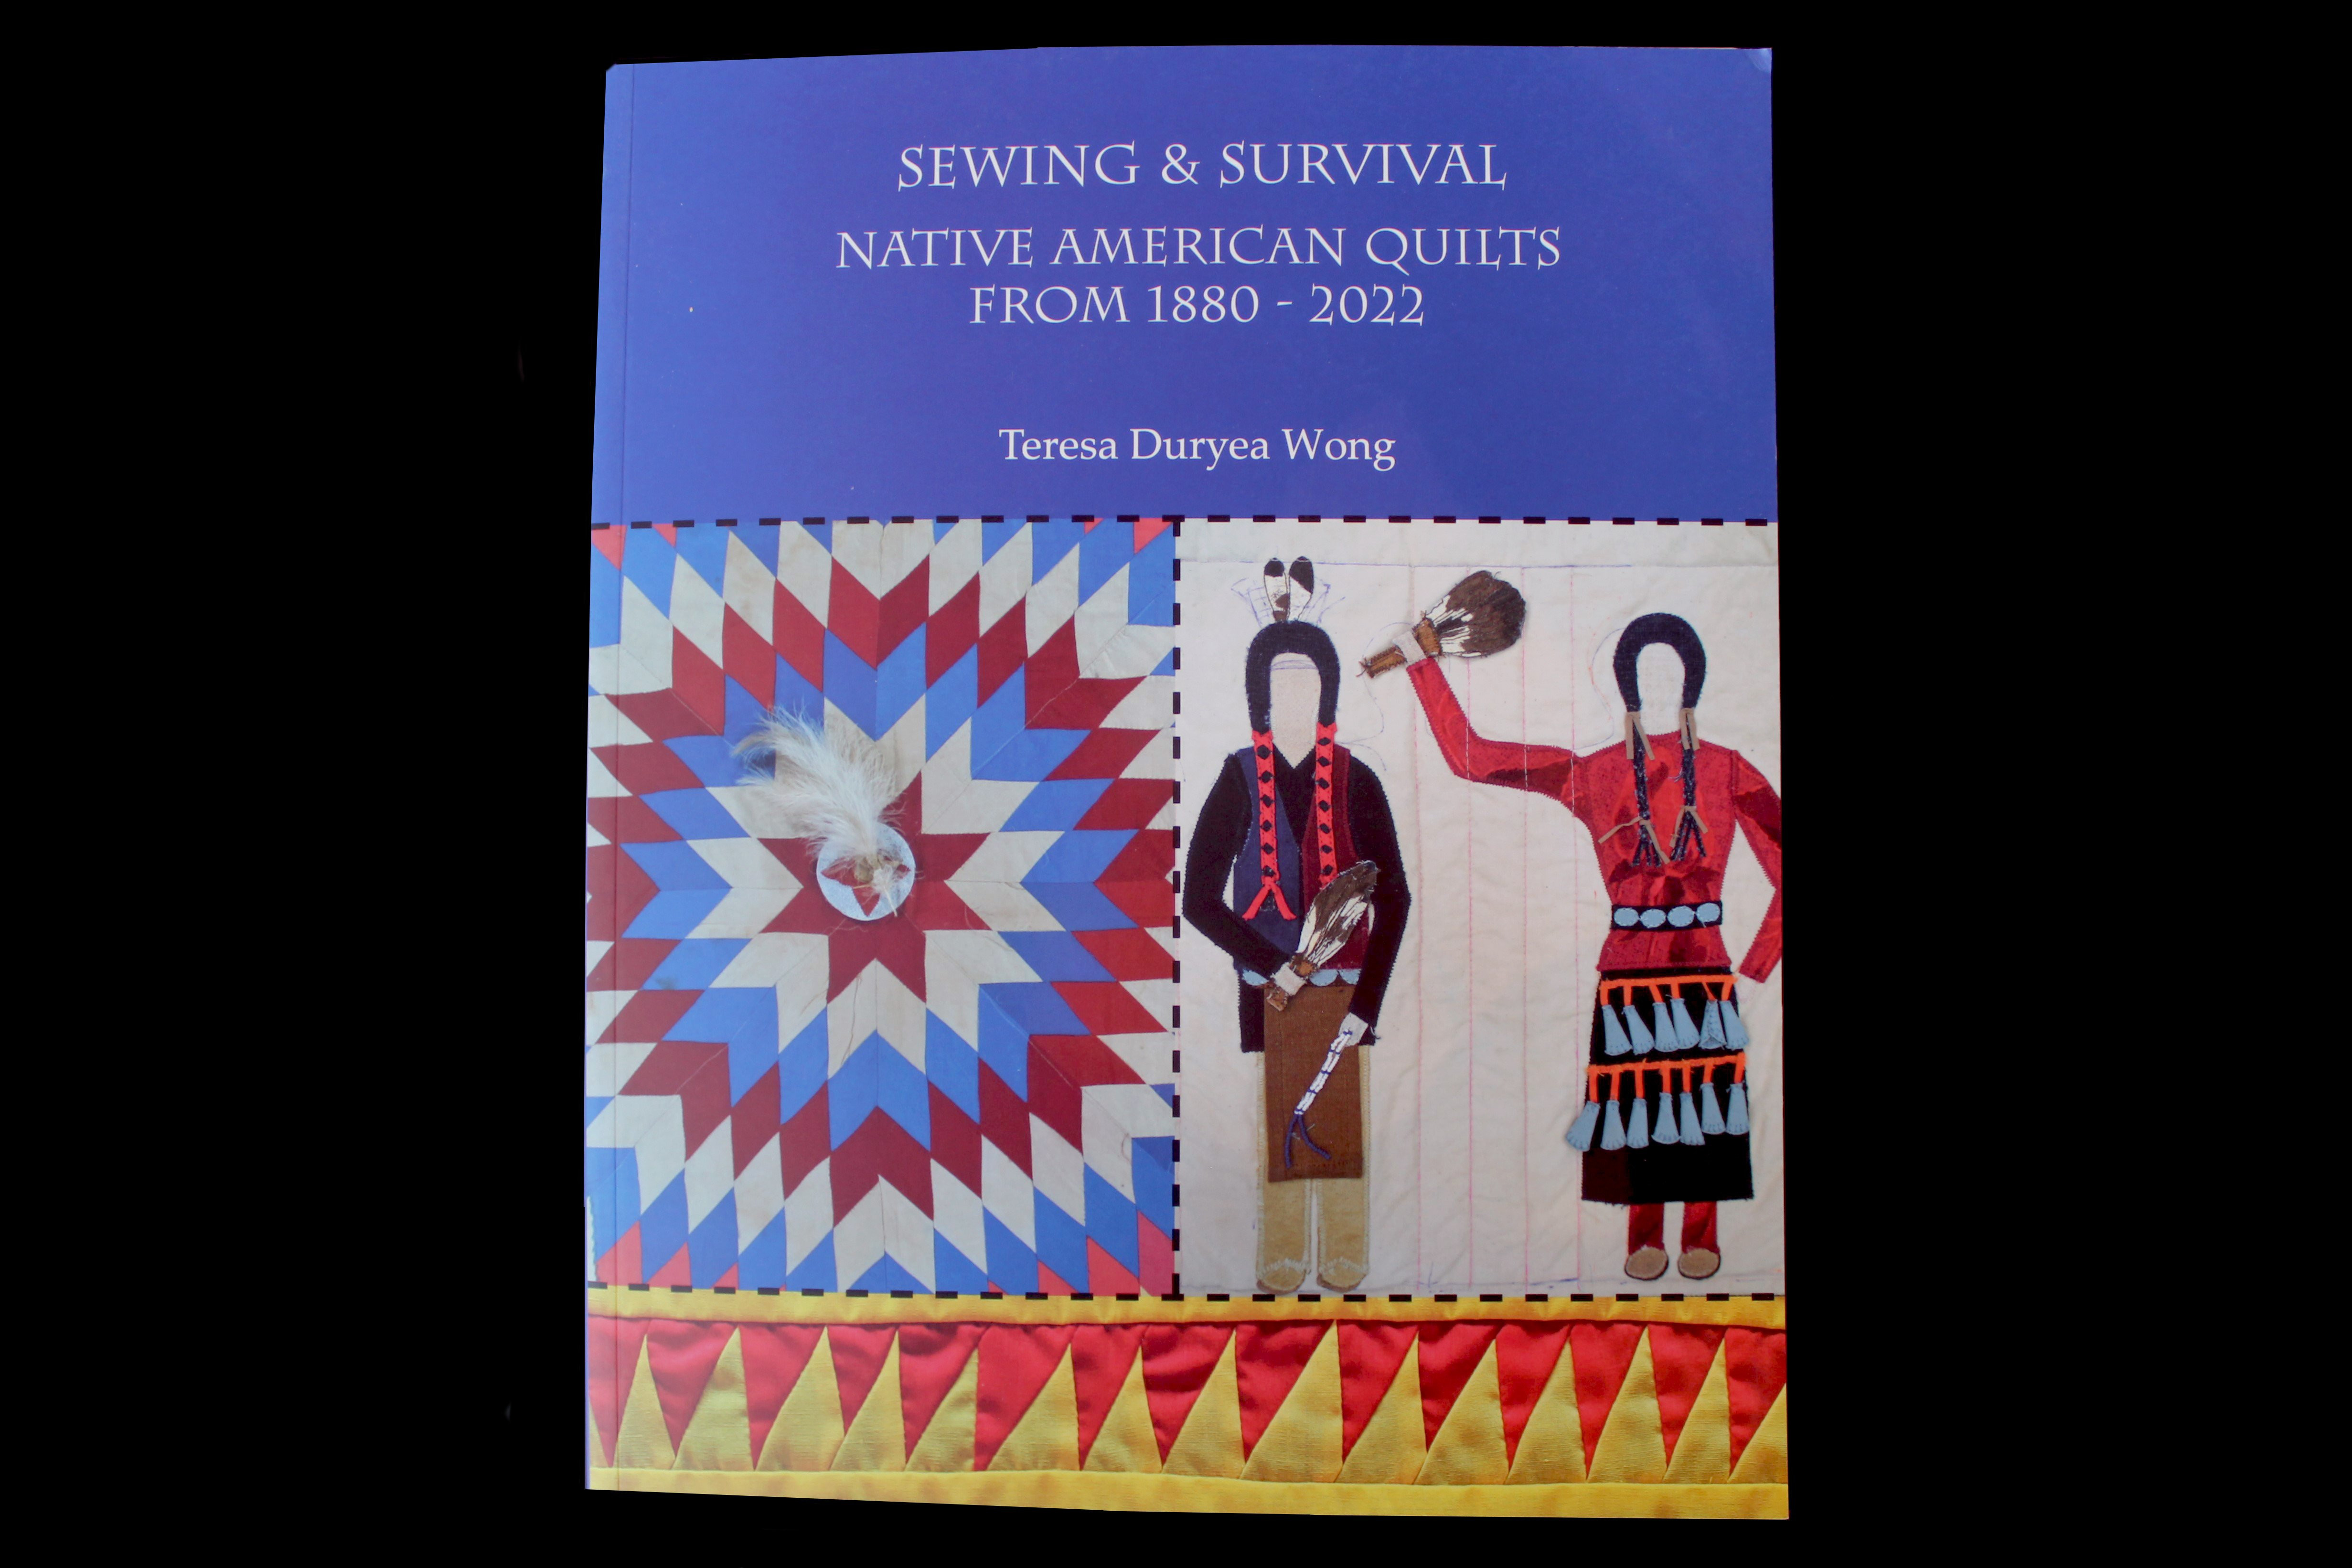 Sewing & Survival Native American Quilts From 1880 - 2022